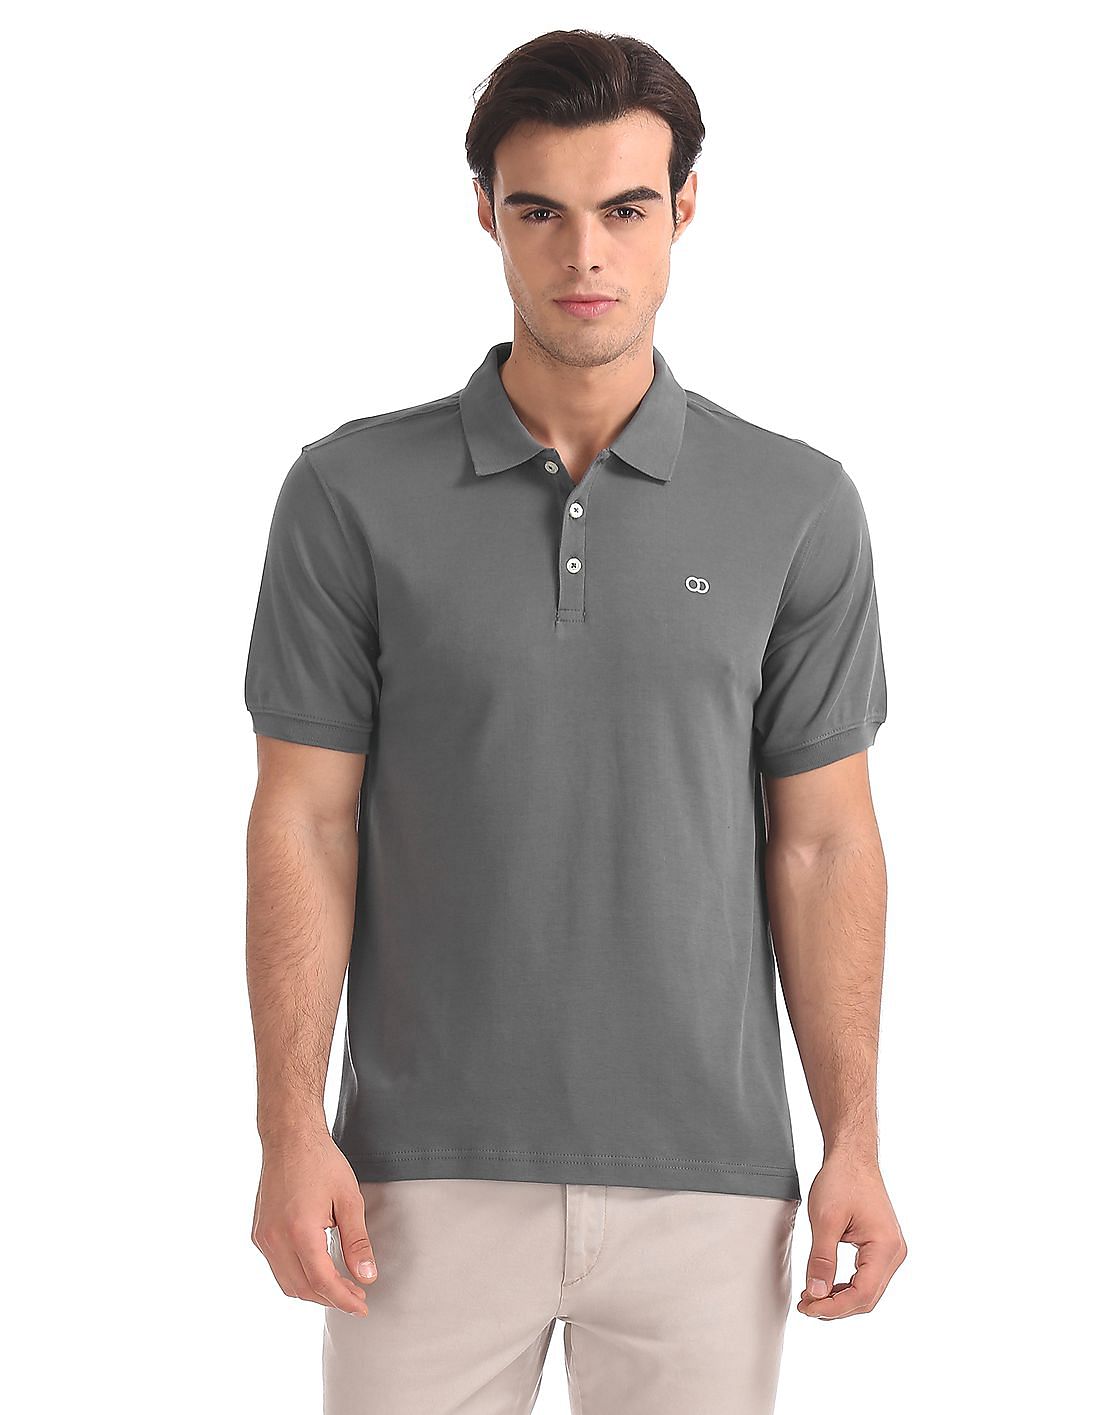 Buy Ruggers Regular Fit Solid Polo Shirt - NNNOW.com